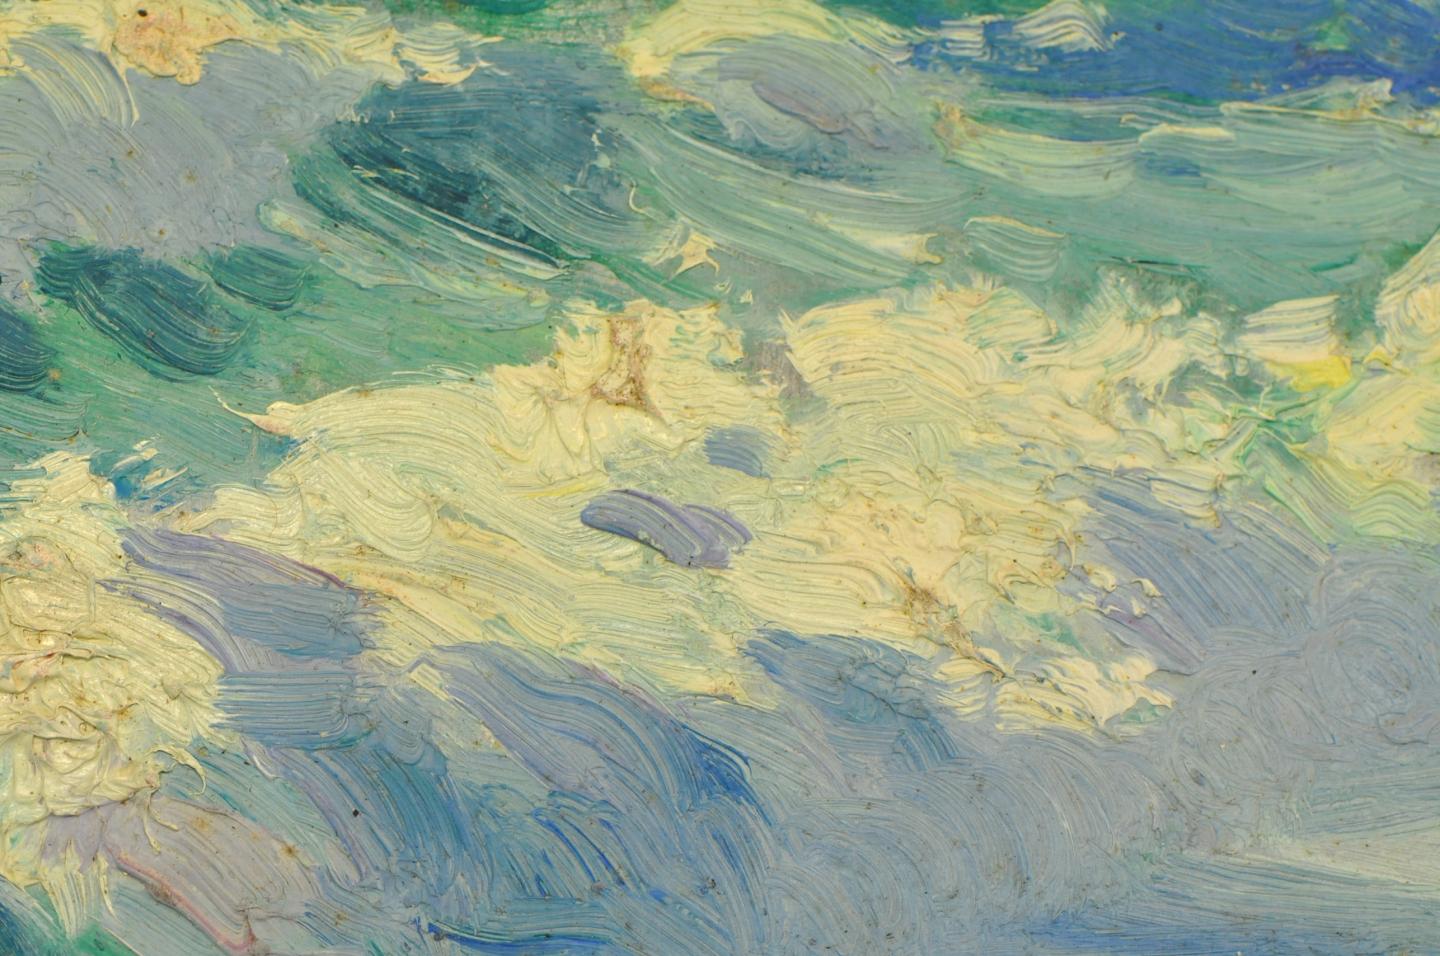 Detail of the paint on one of the Everett paintings showing his wet-in-wet thick brushwork (BHC2197).